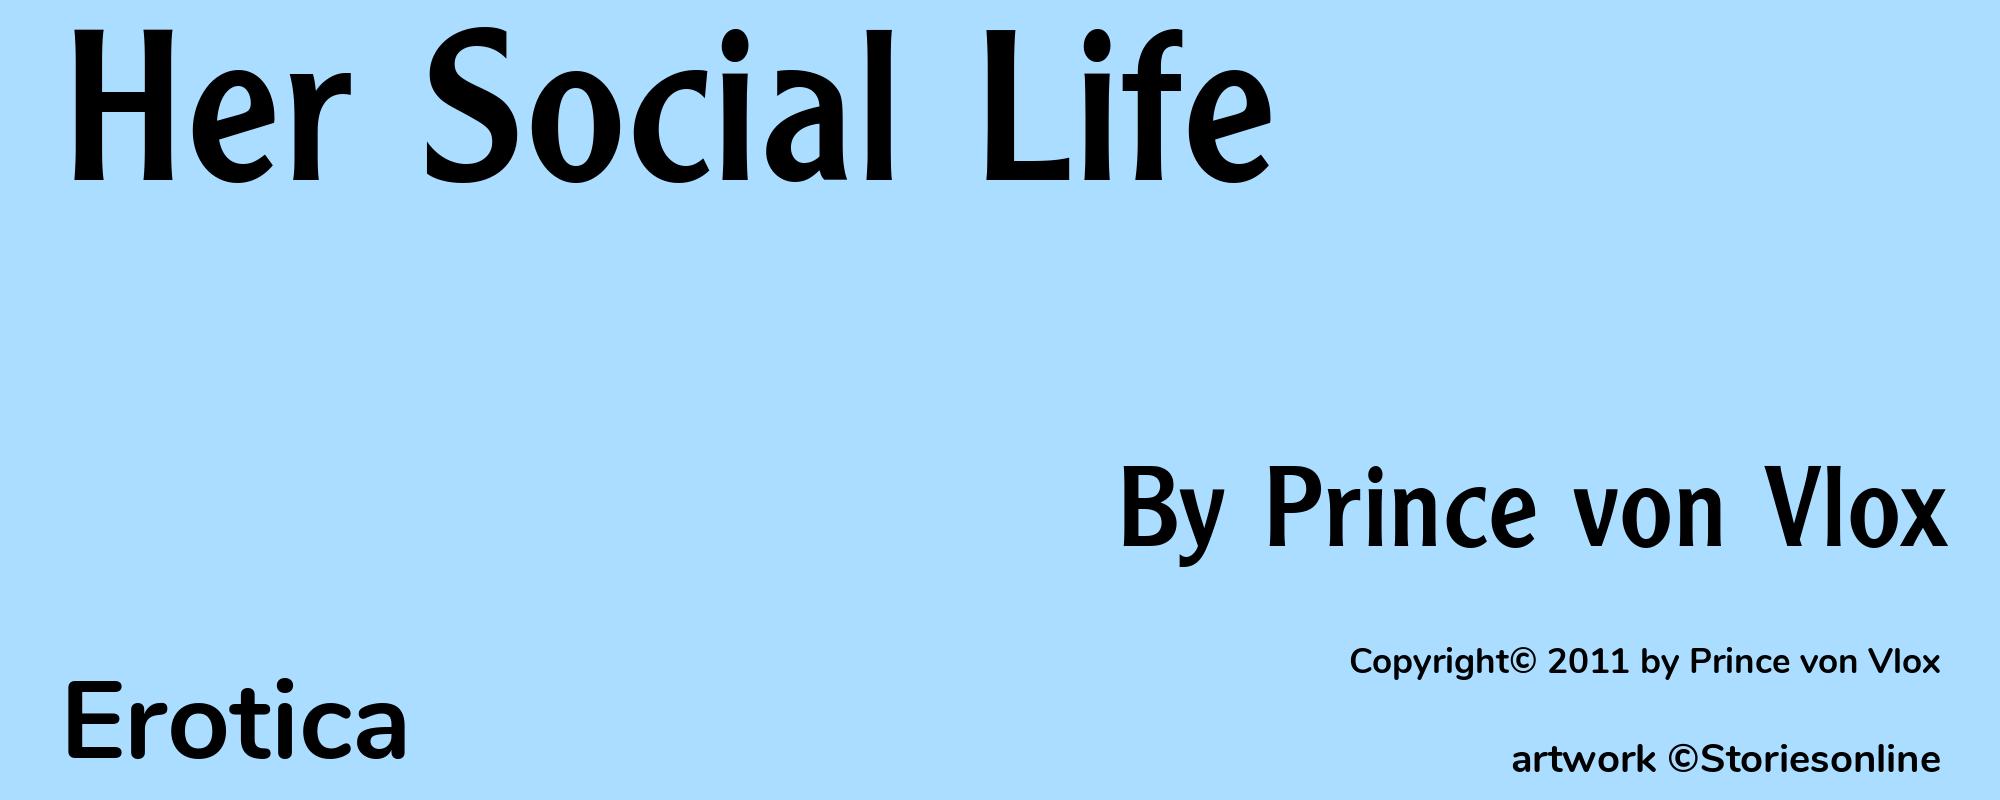 Her Social Life - Cover